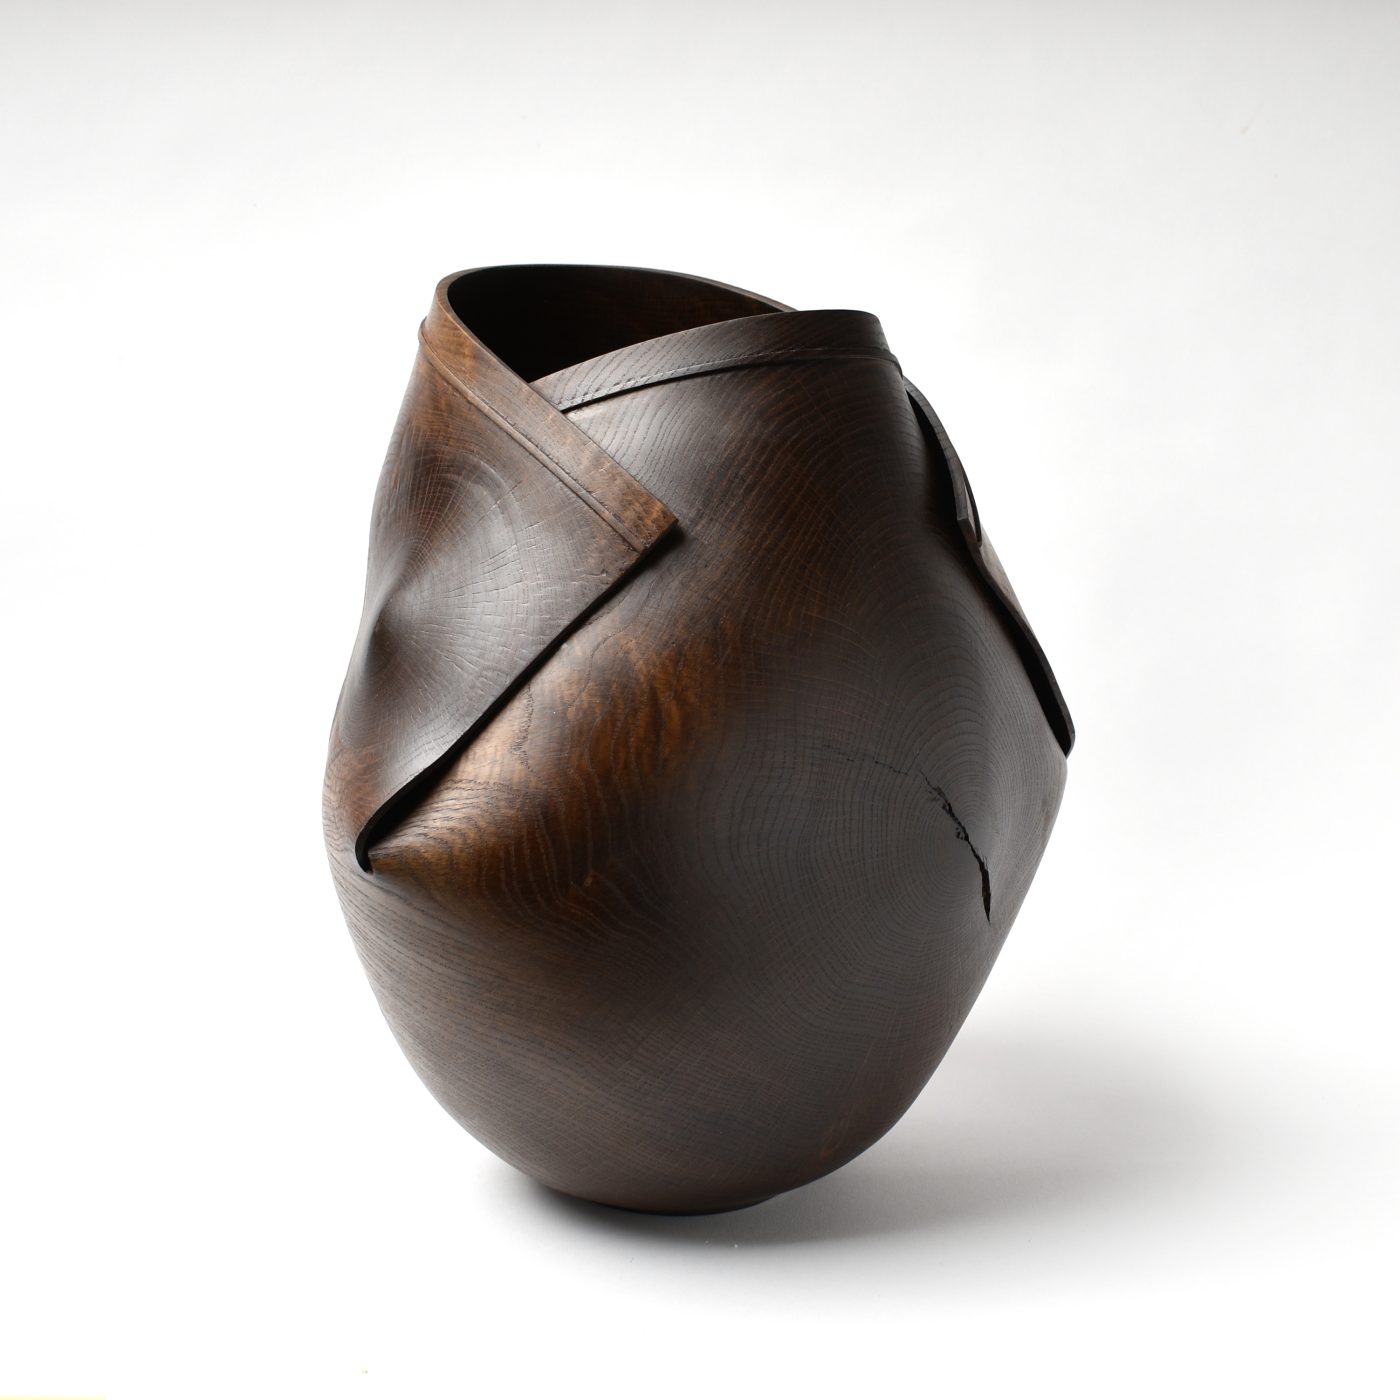 A wooden vessel by Alan Meredith offered by Liz O'Brien